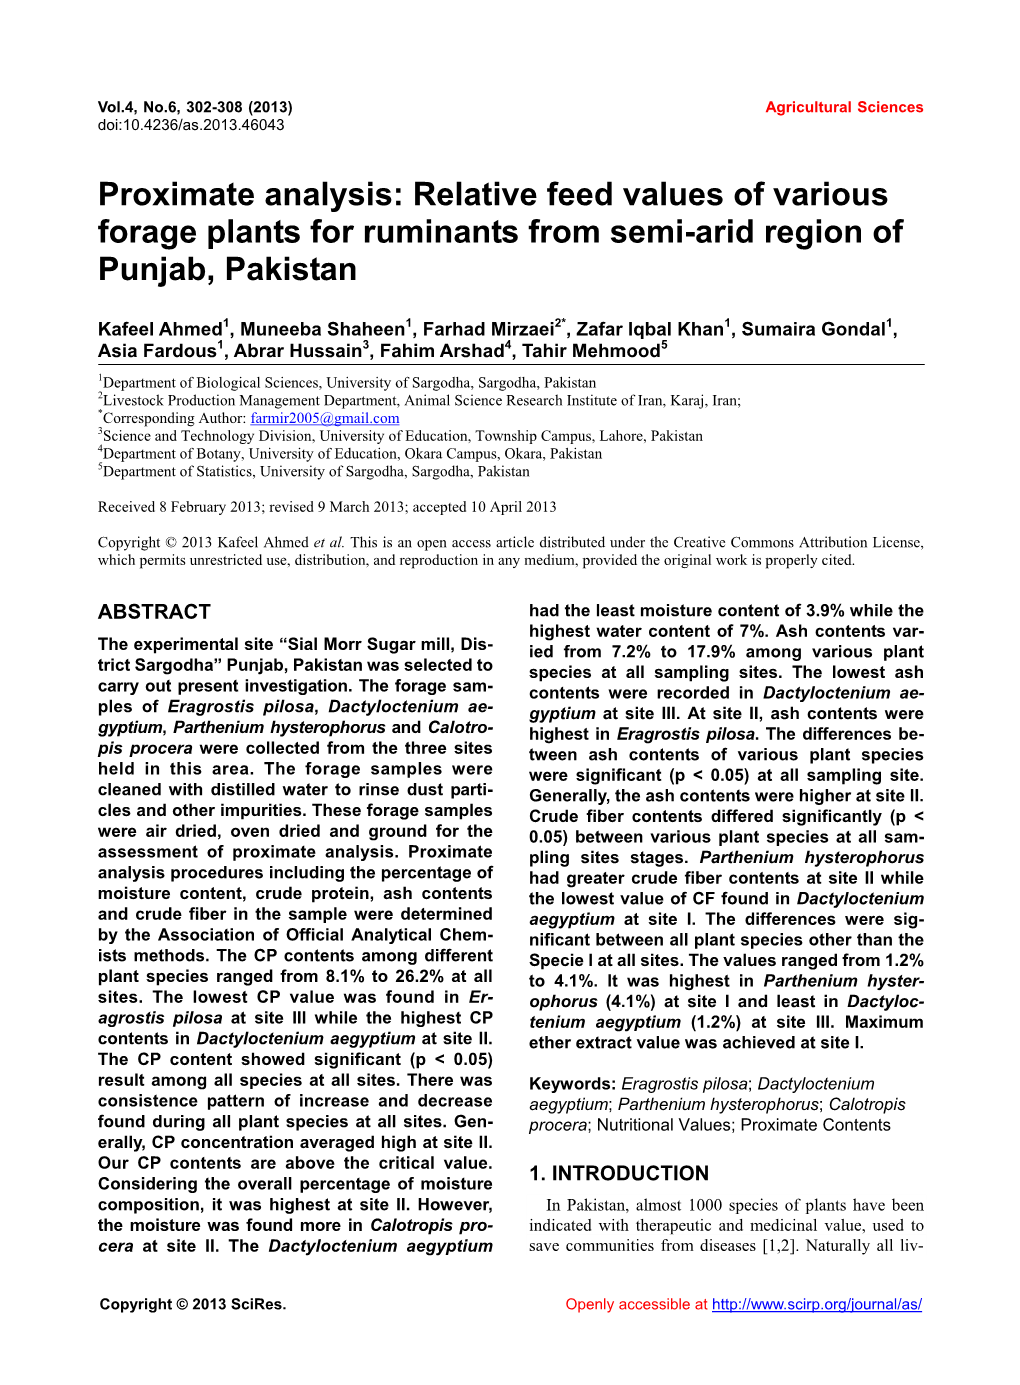 Proximate Analysis: Relative Feed Values of Various Forage Plants for Ruminants from Semi-Arid Region of Punjab, Pakistan